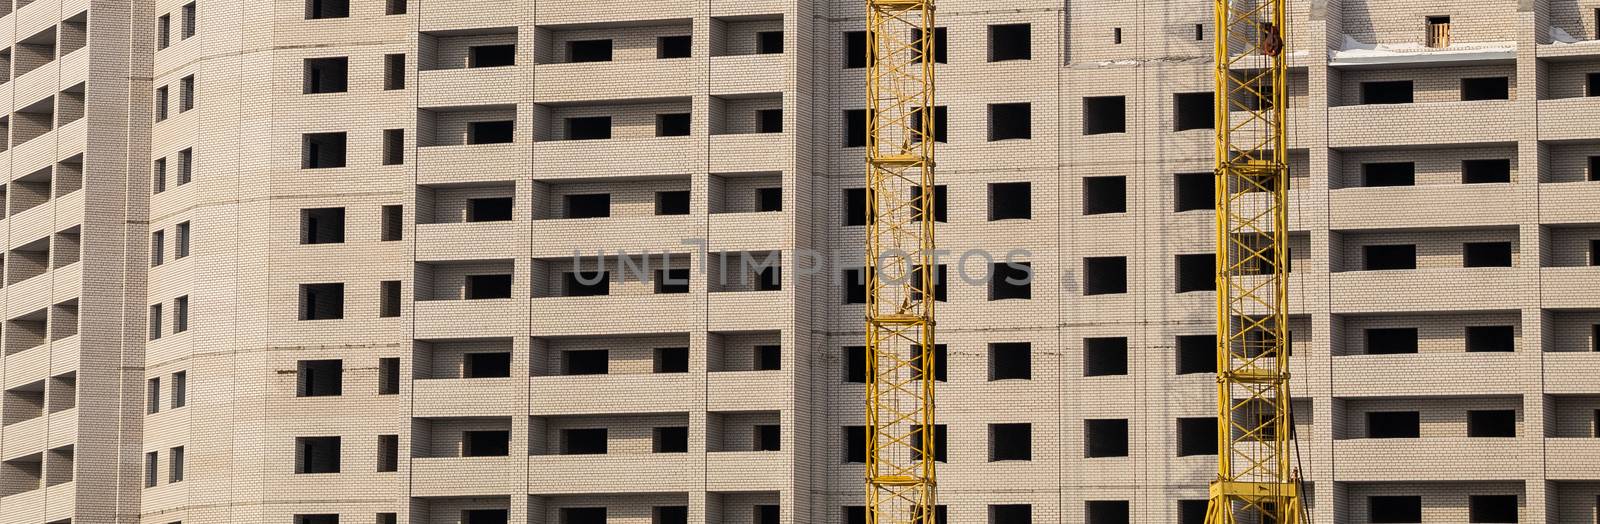 Construction site. Unfinished apartment building made of white bricks. Special yellow industrial construction cranes. Empty windows and balconies.